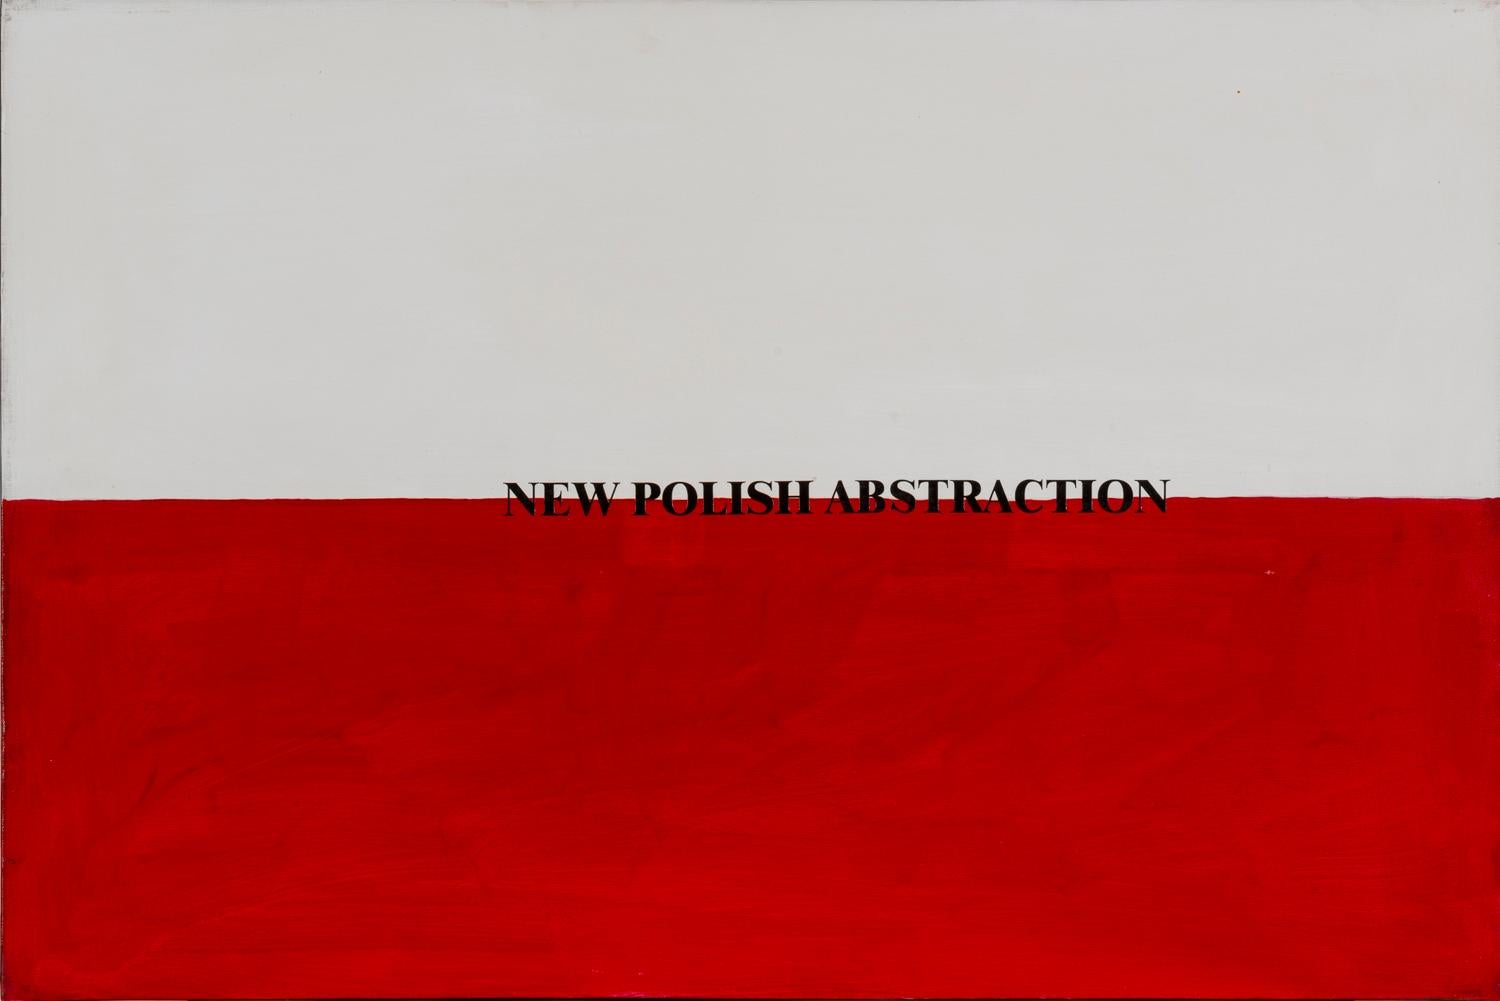 New Polish Abstraction, 1972-2002, Acrylic on canvas, Flags, Visual Poetry